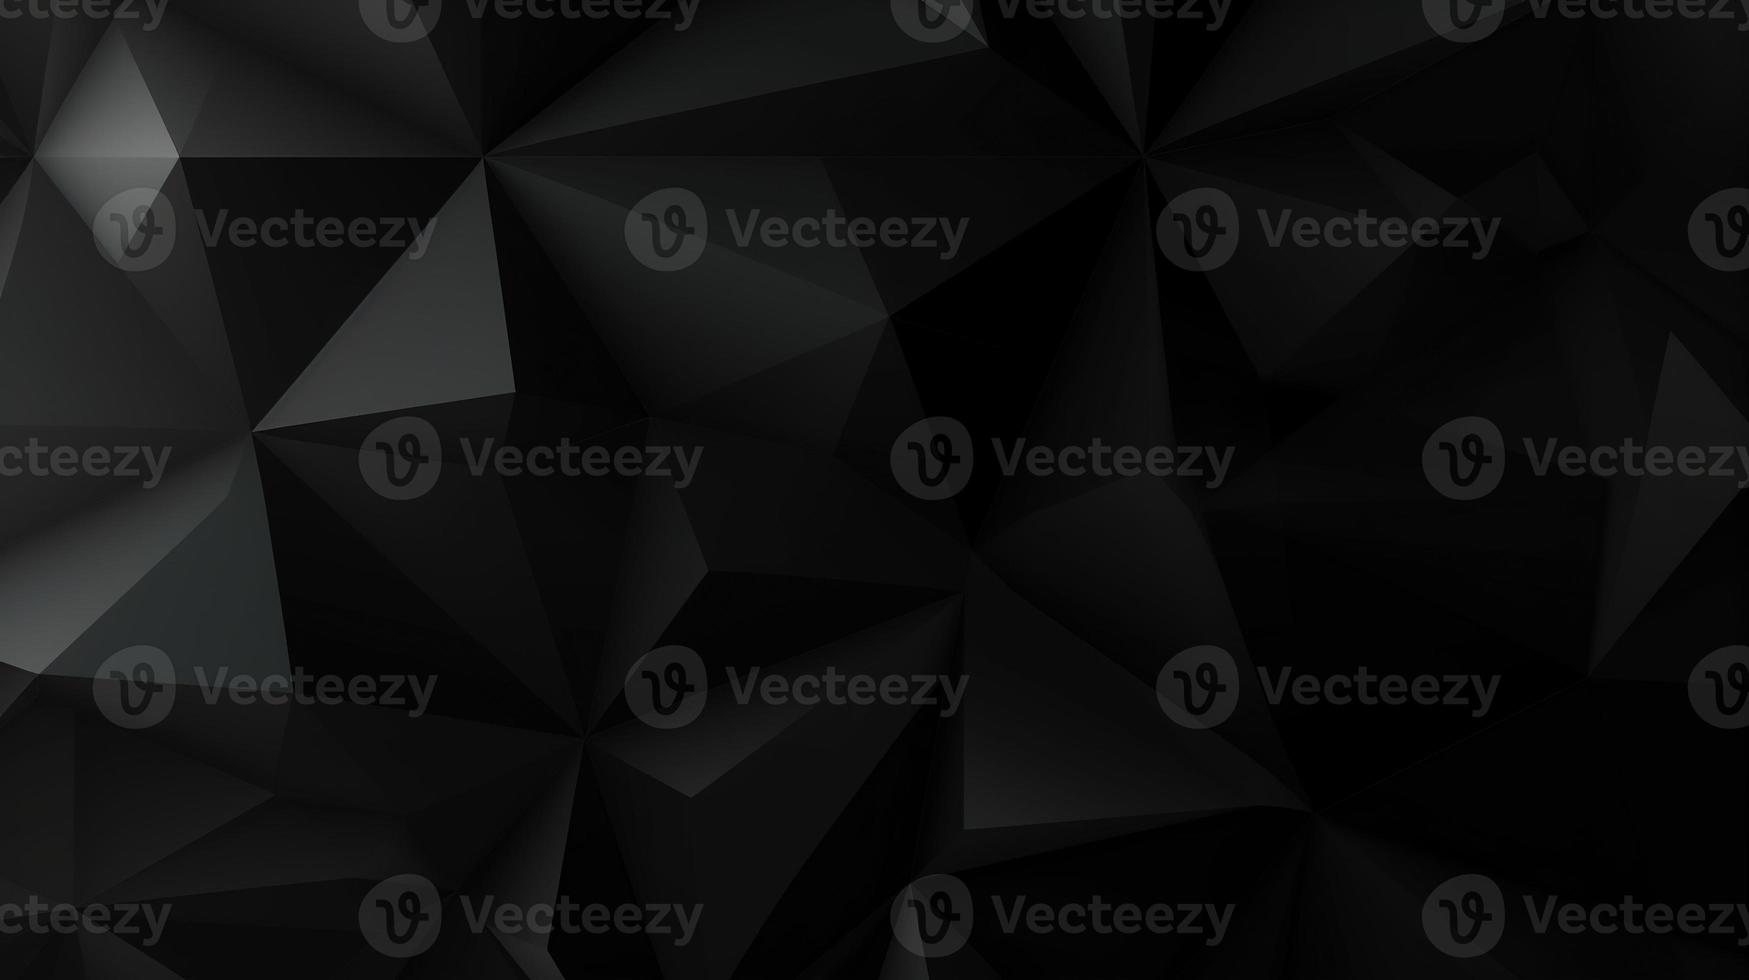 Black polygonal abstract background. Triangular 3d texture. photo